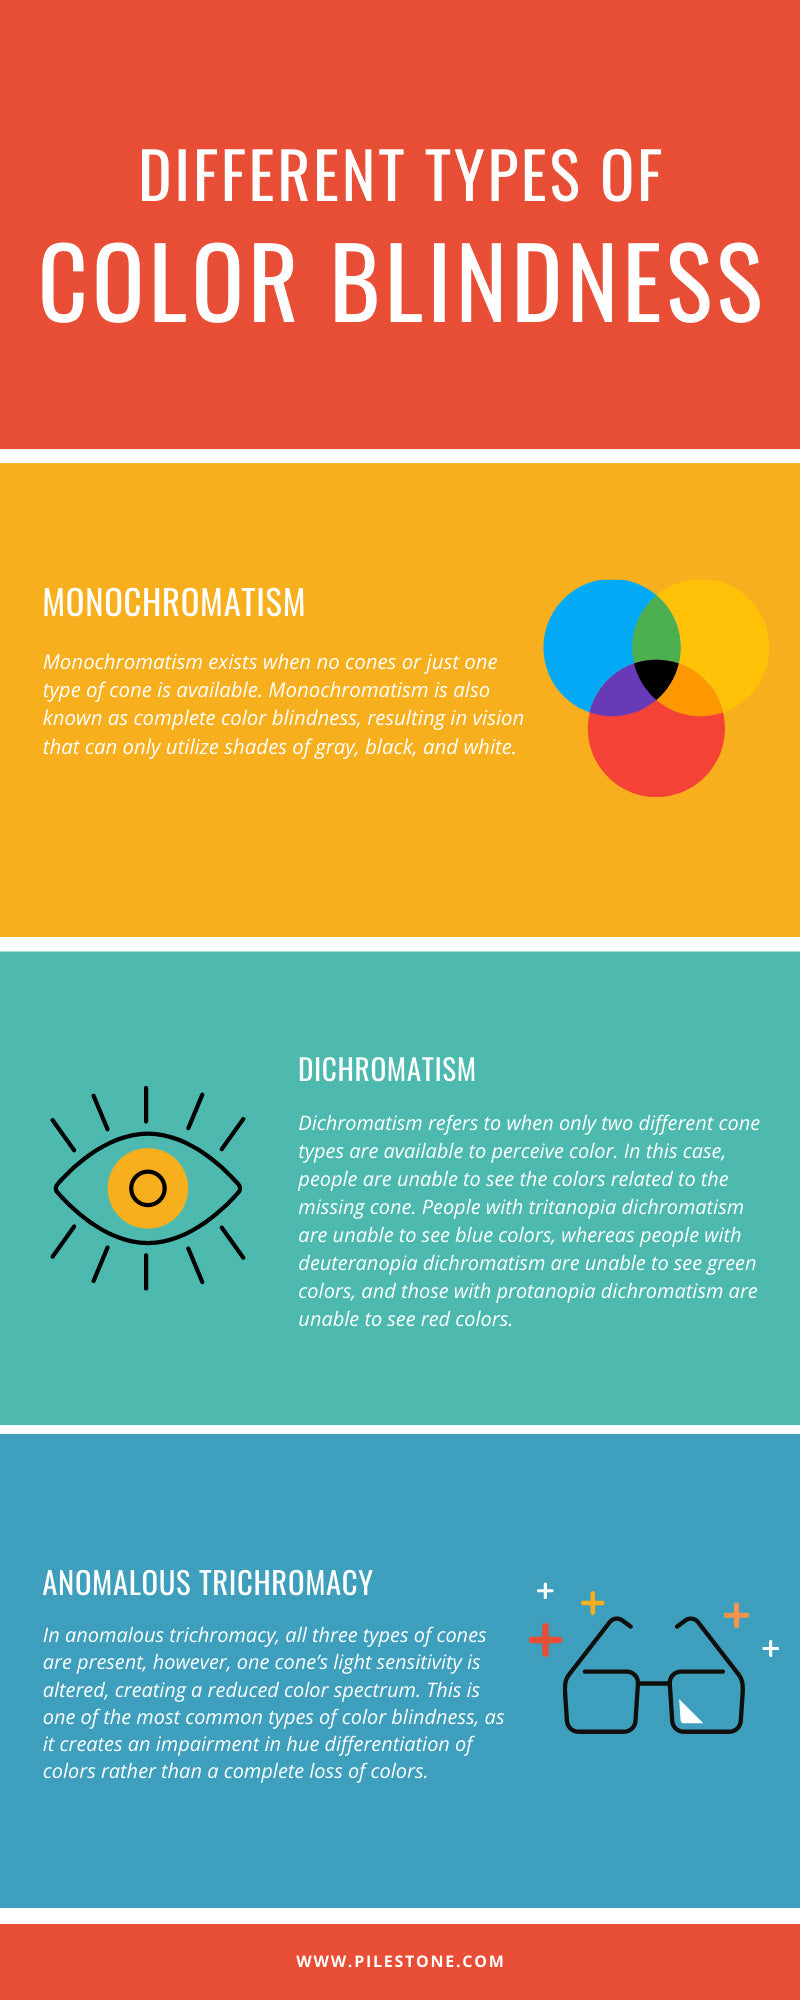 Different Types of Color Blindness